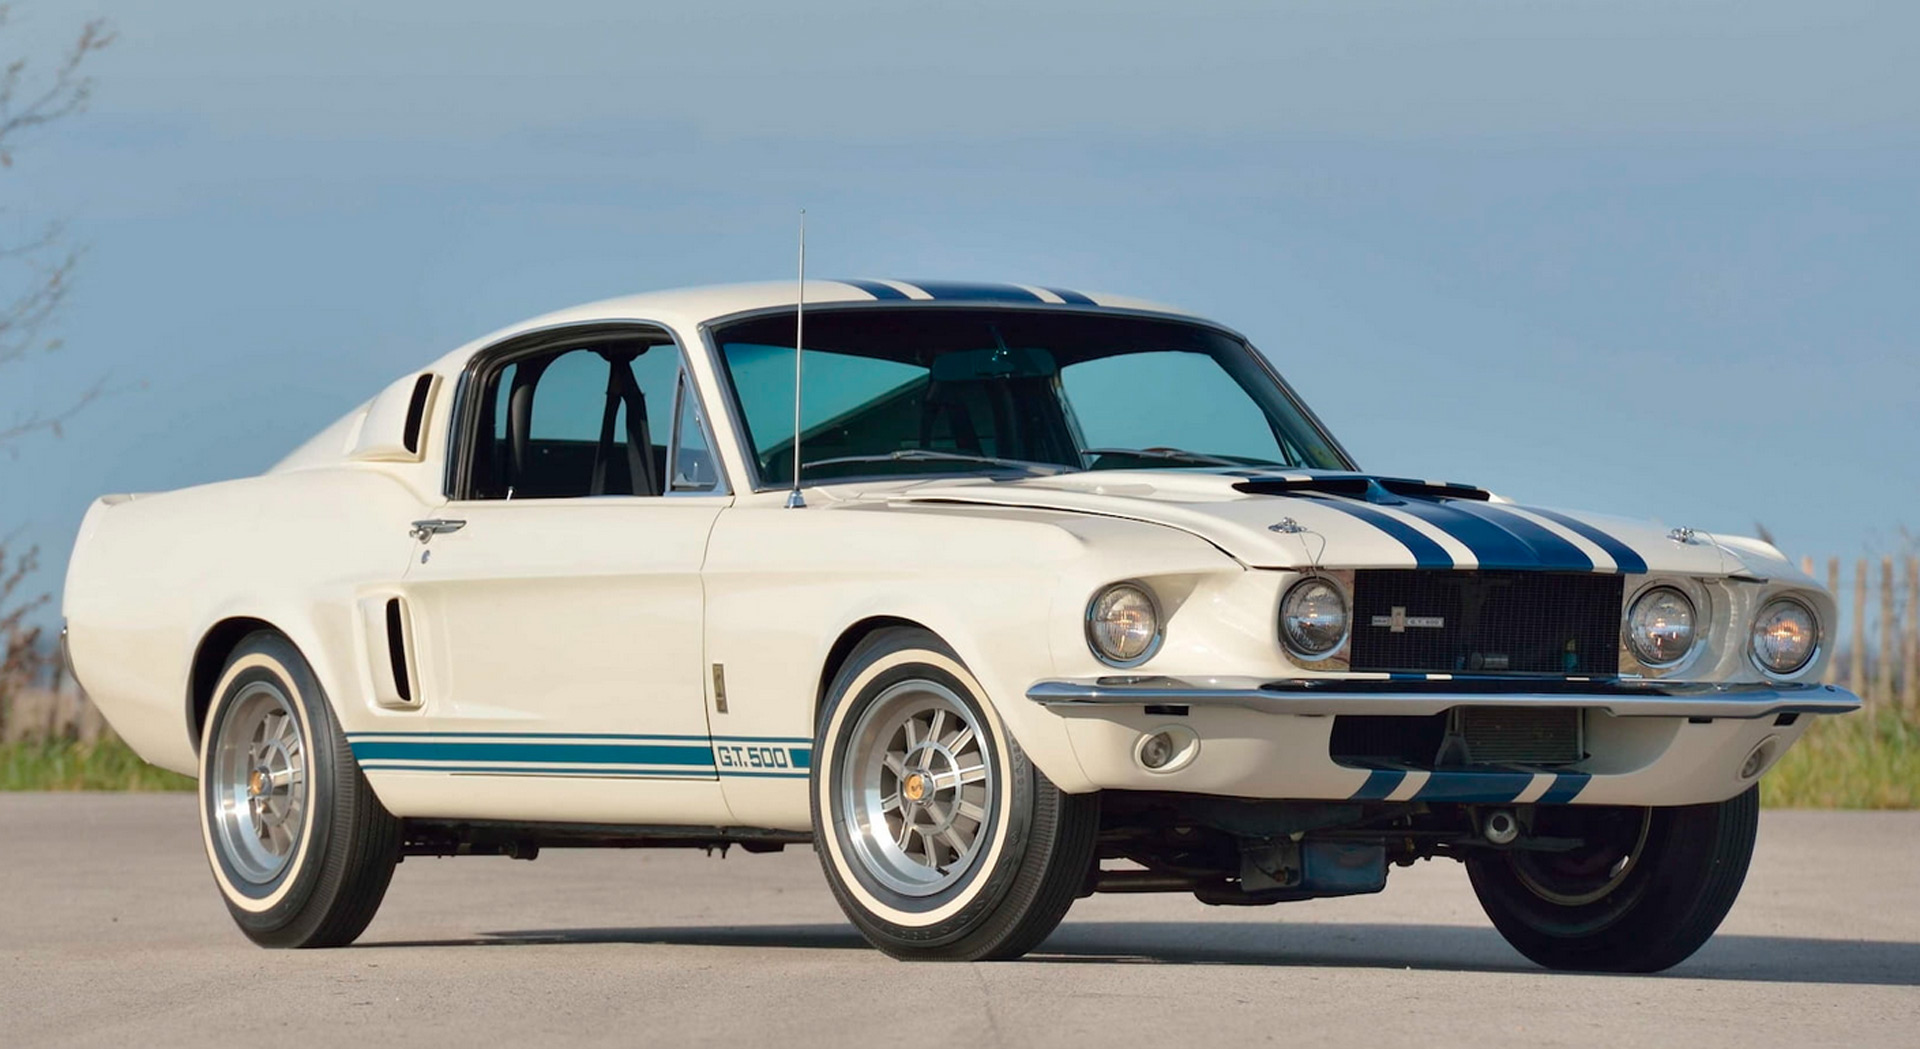 Mustang Of The Day: 1967 Shelby GT Super Snake